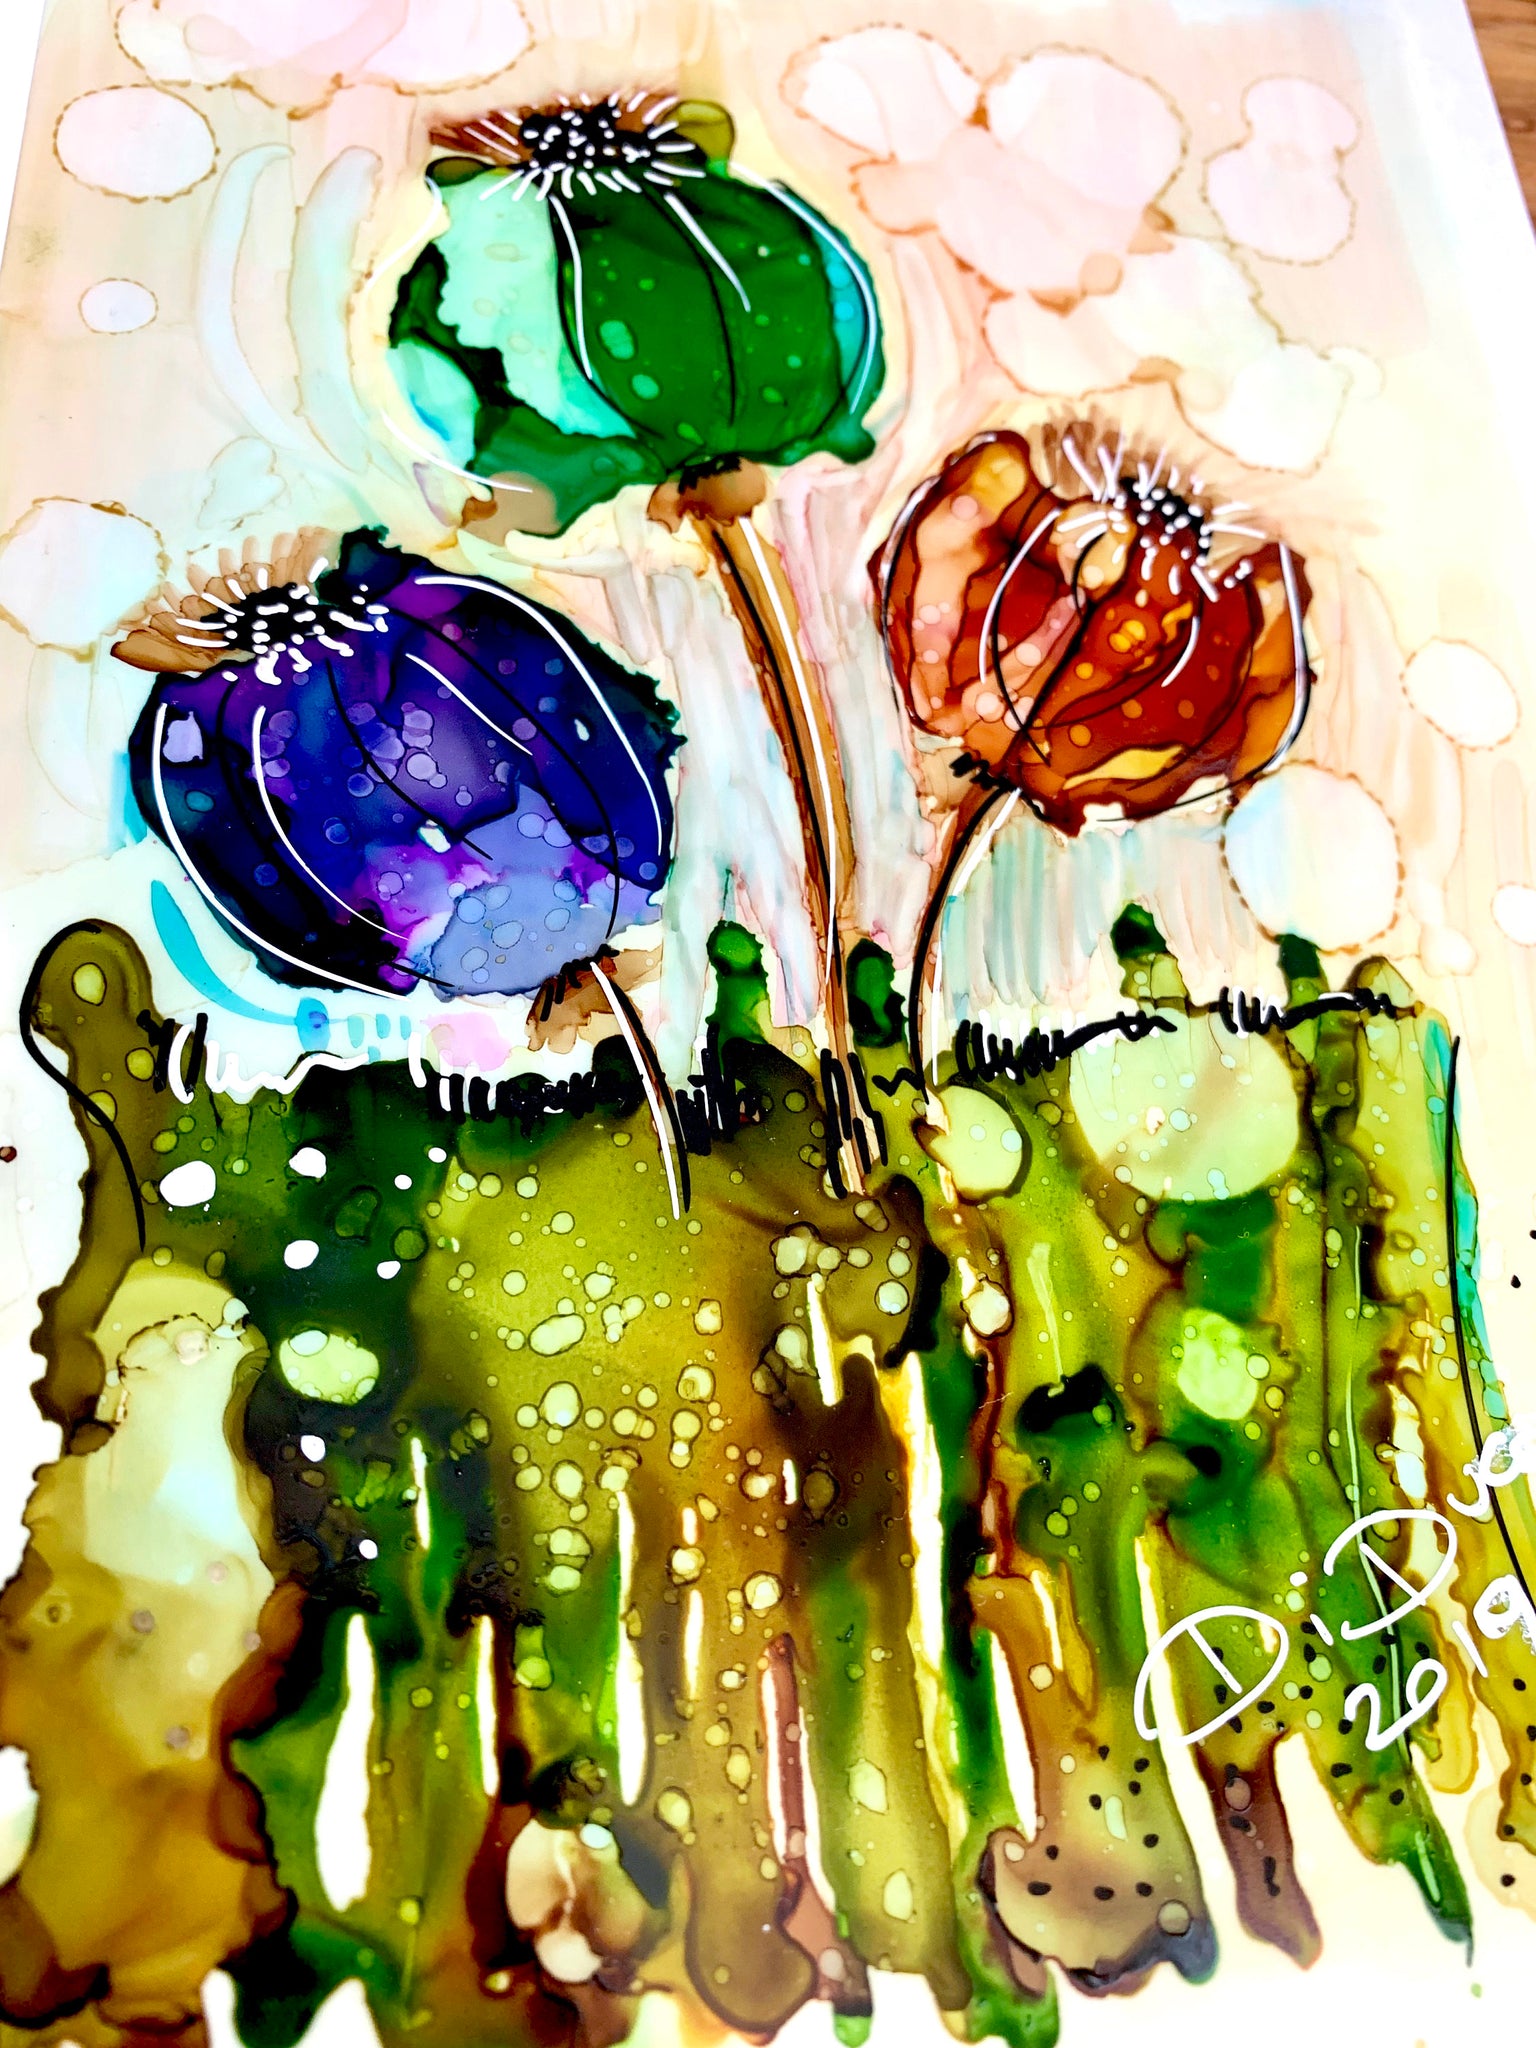 Piece of nature - Alcohol Ink Painting on Yupo Paper – didART studio